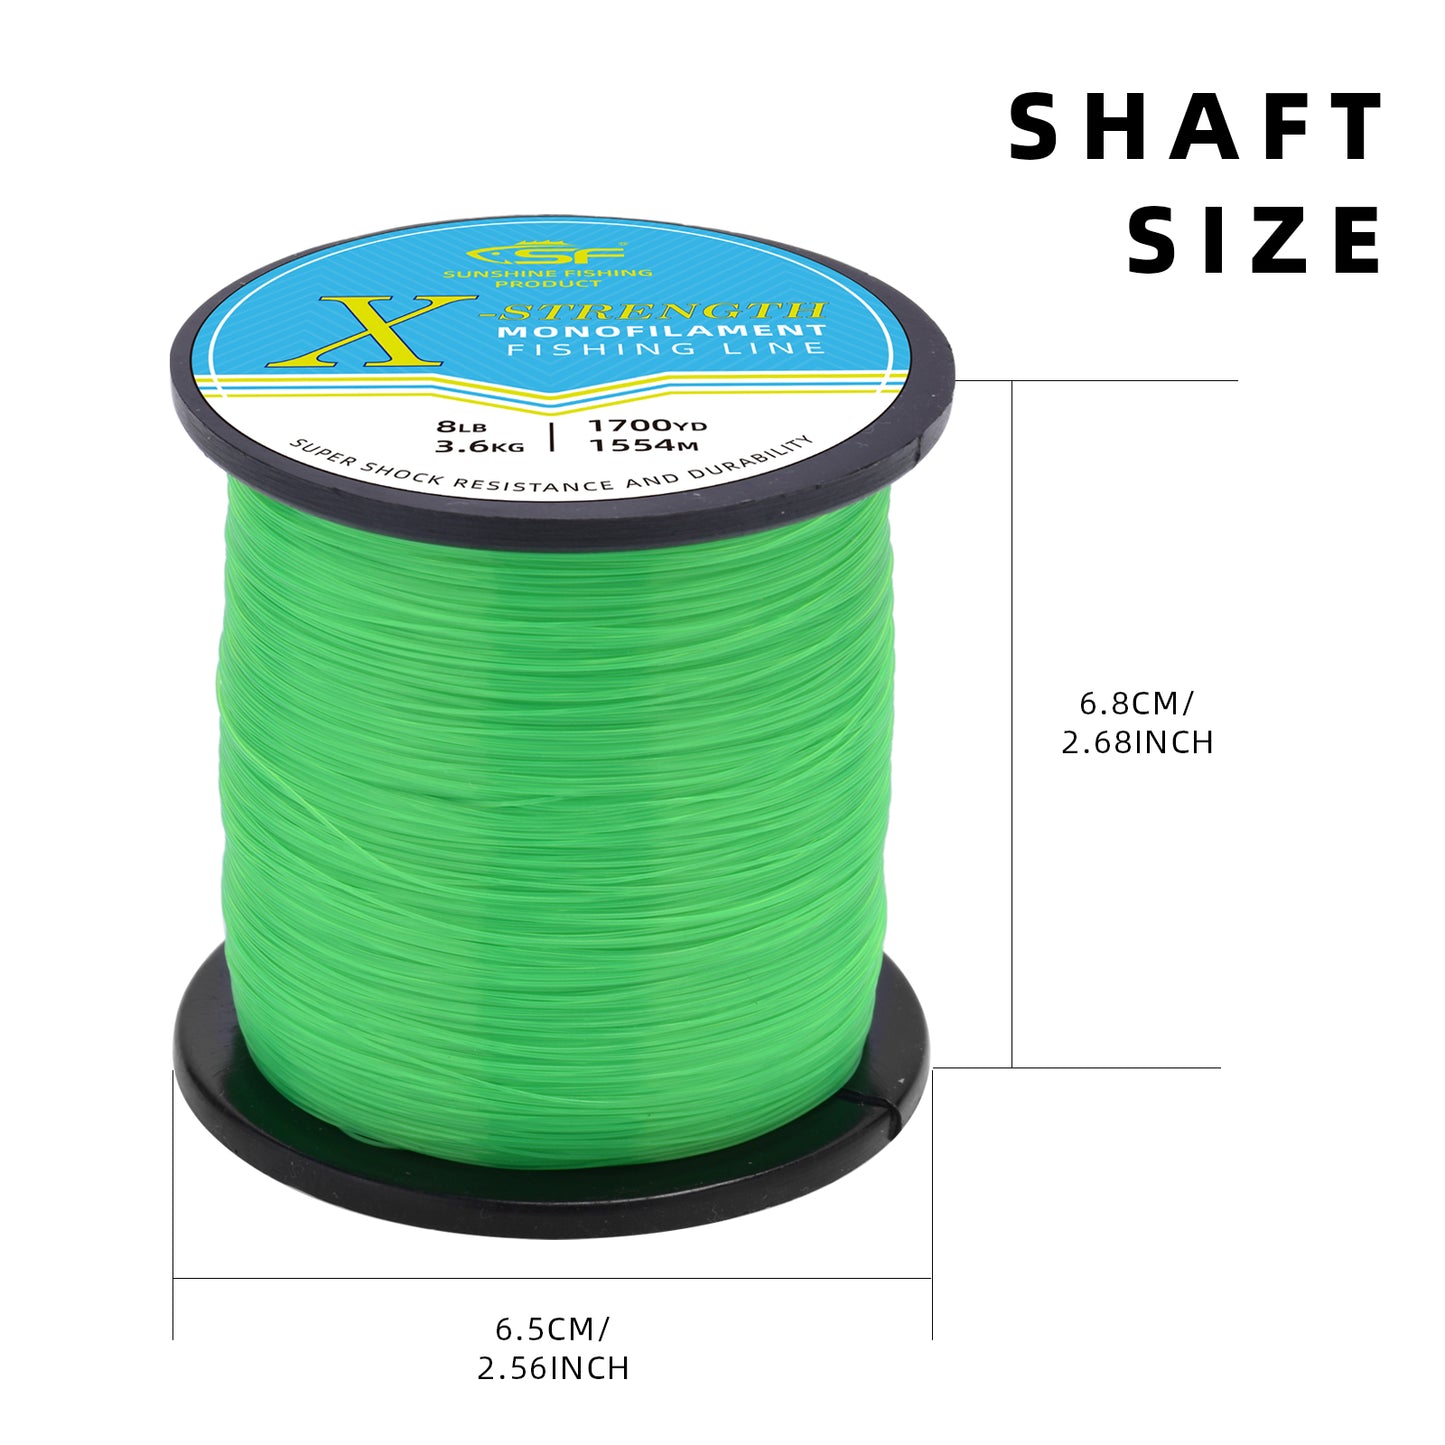 SF Fly Fishing Floating Line (Spring Green) – Sunshine Fishing Store